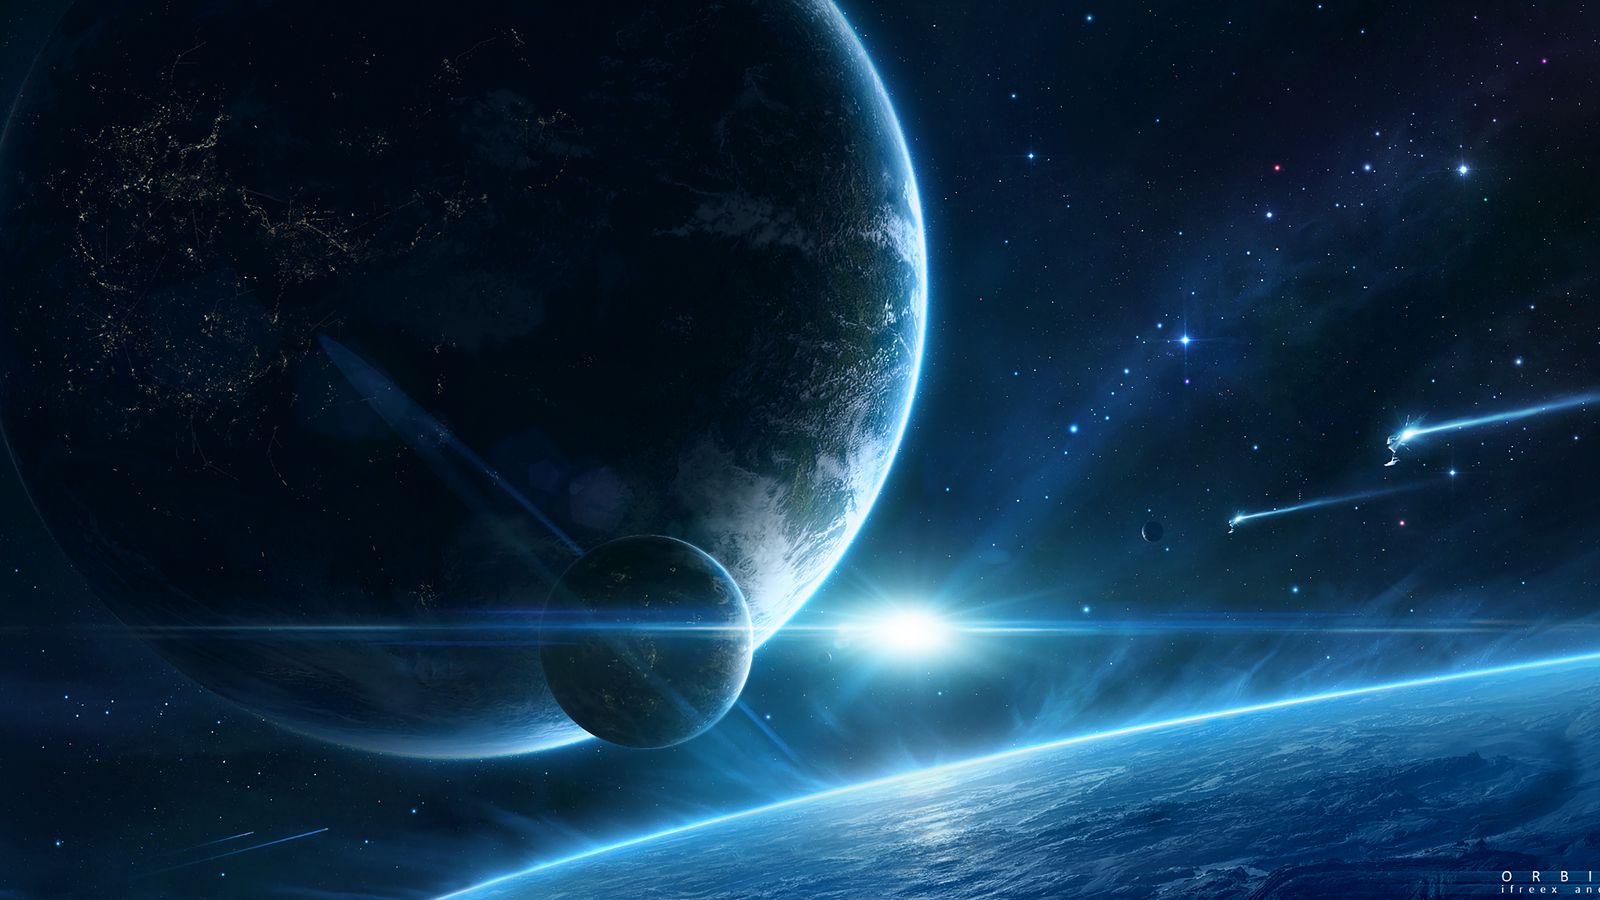 Download wallpaper 1600x900 planet, space, satellite, outer space ...